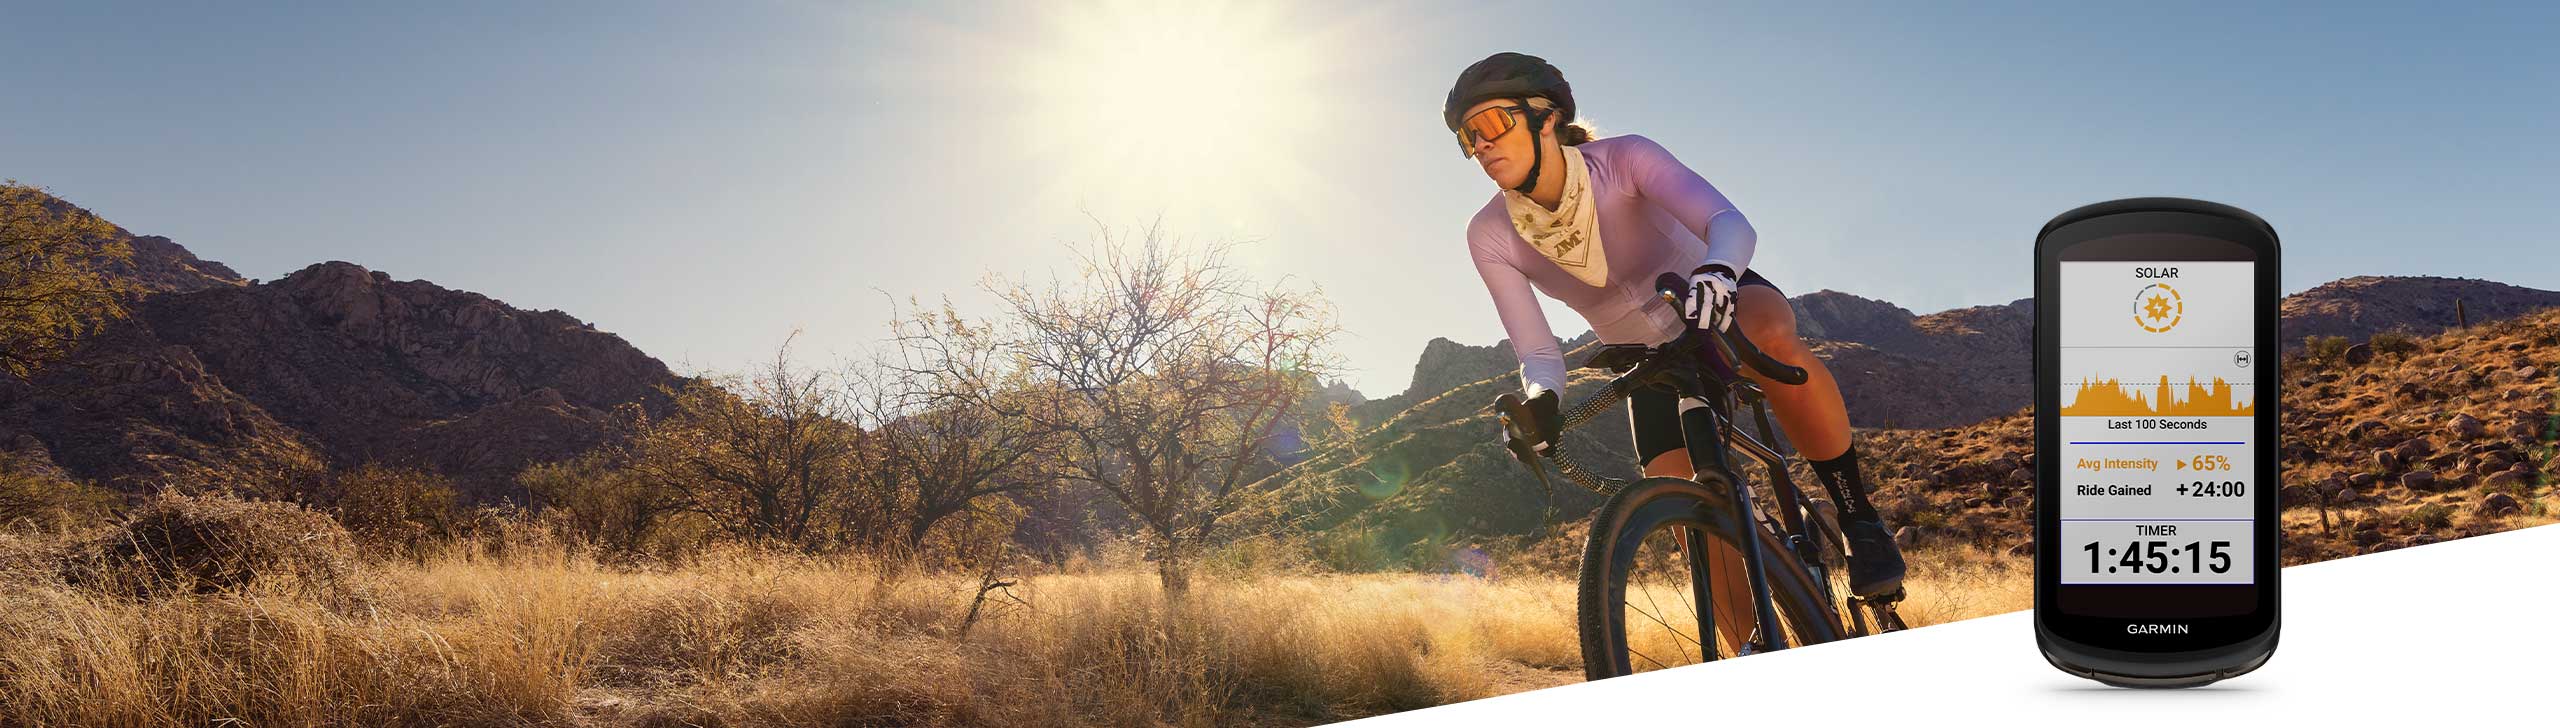 [20220701] Garmin Empowers Cyclists with New Edge 1040 Solar Cycling Computer and Rally XC200 Power